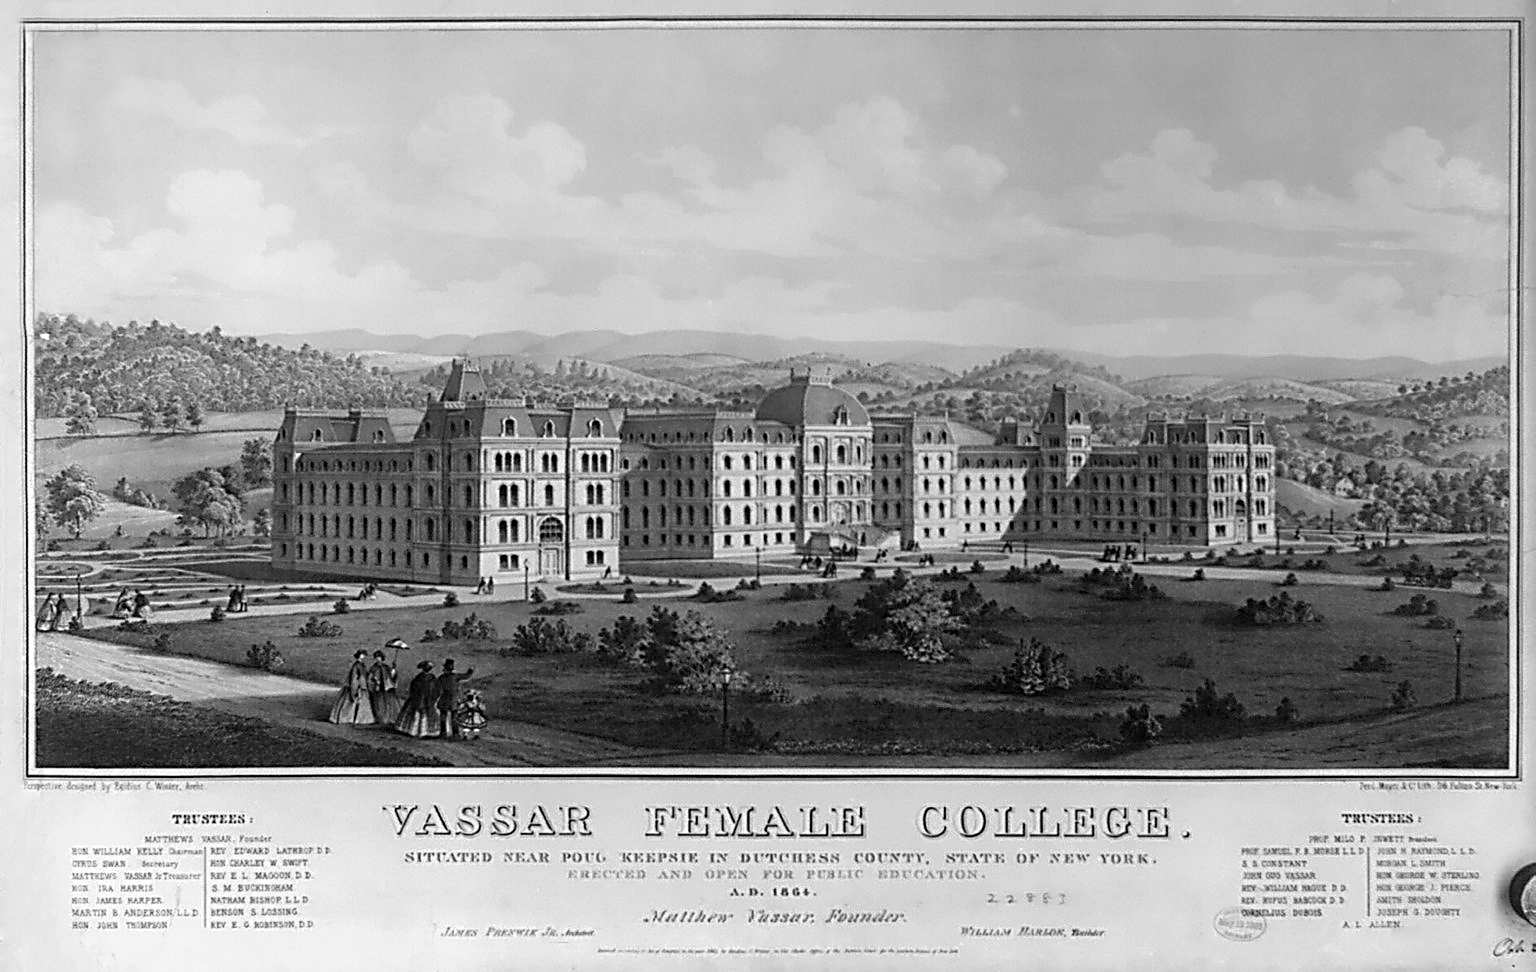 A 19th-century poster of Vassar. This feature is a large engraving of the building and the surrounding woodlands. The building is a large multiple story stone structure. It has the words "Vassar Female College" in large type, and then additional text with the names of all the trustees and the location of the College.